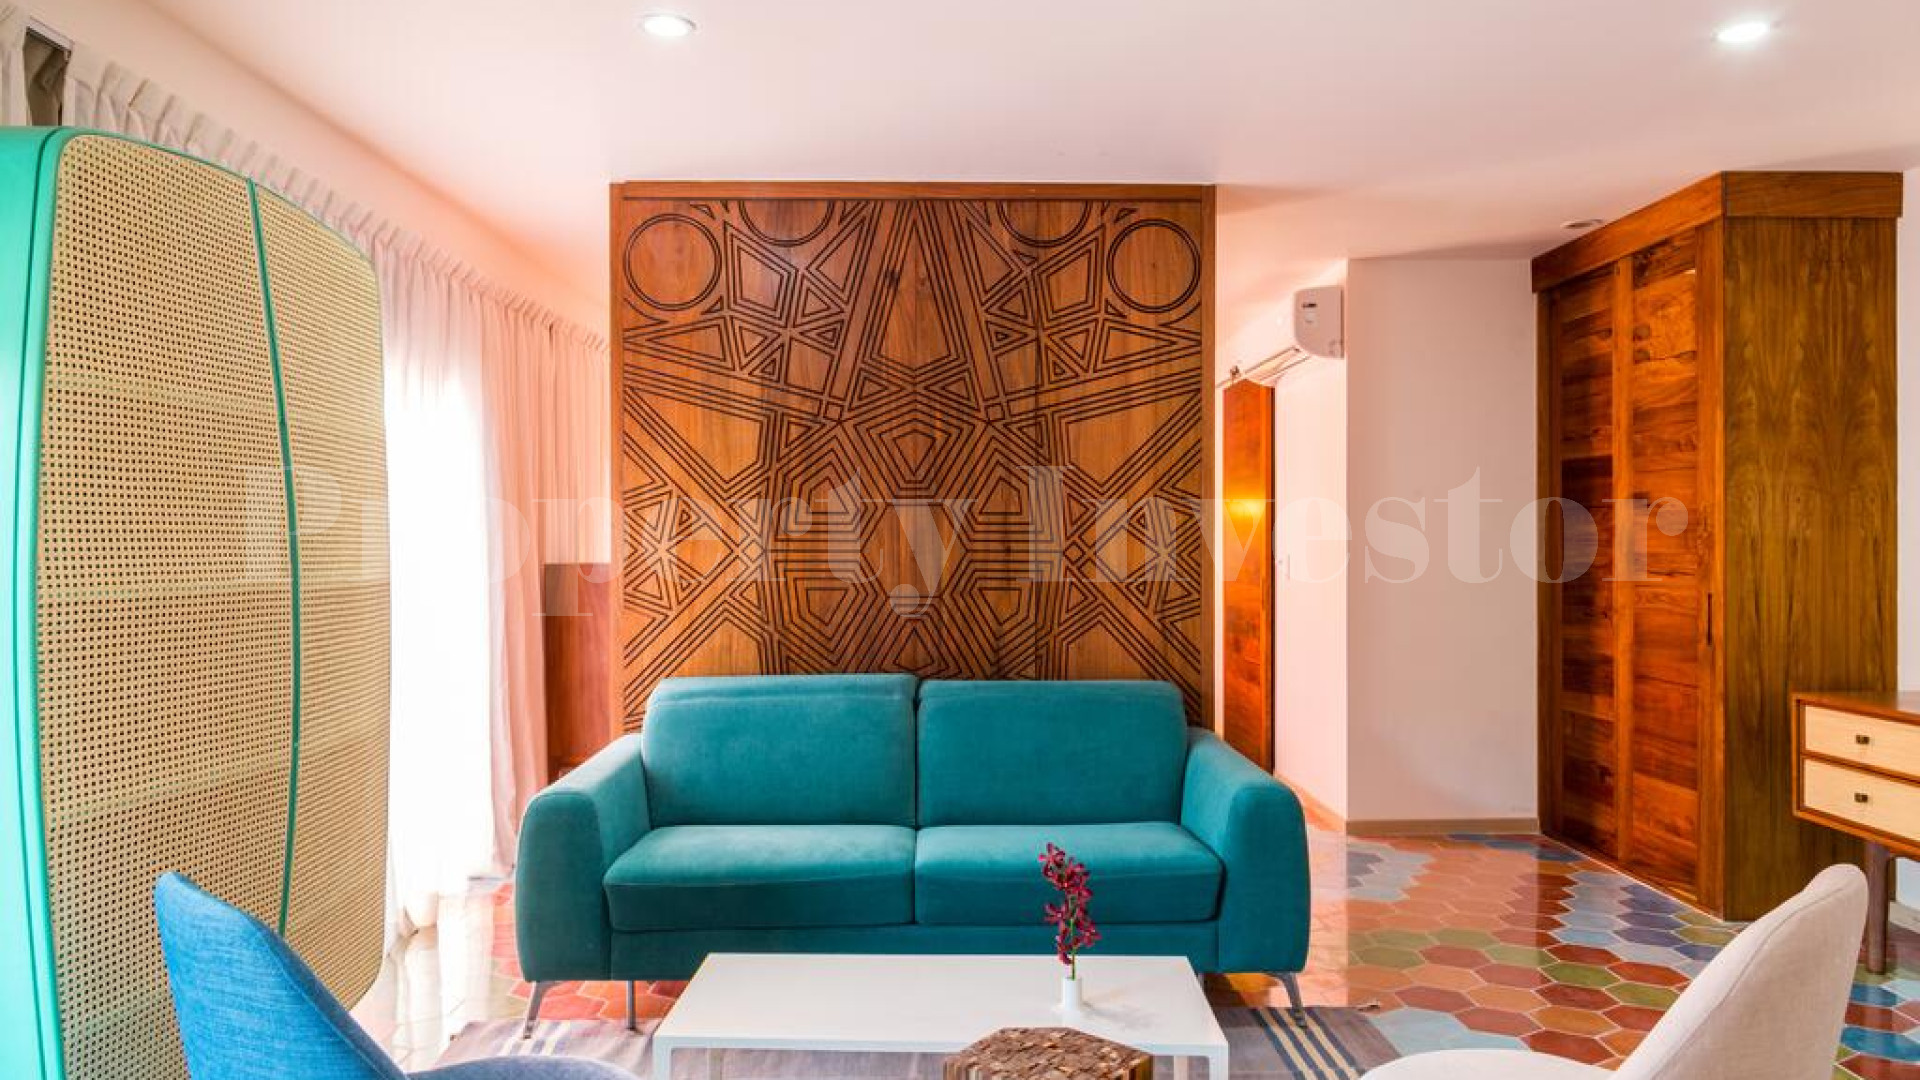 One-of-a-kind 20 Room Boutique Hotel for Sale Near 5th Avenue in Playa del Carmen, Mexico